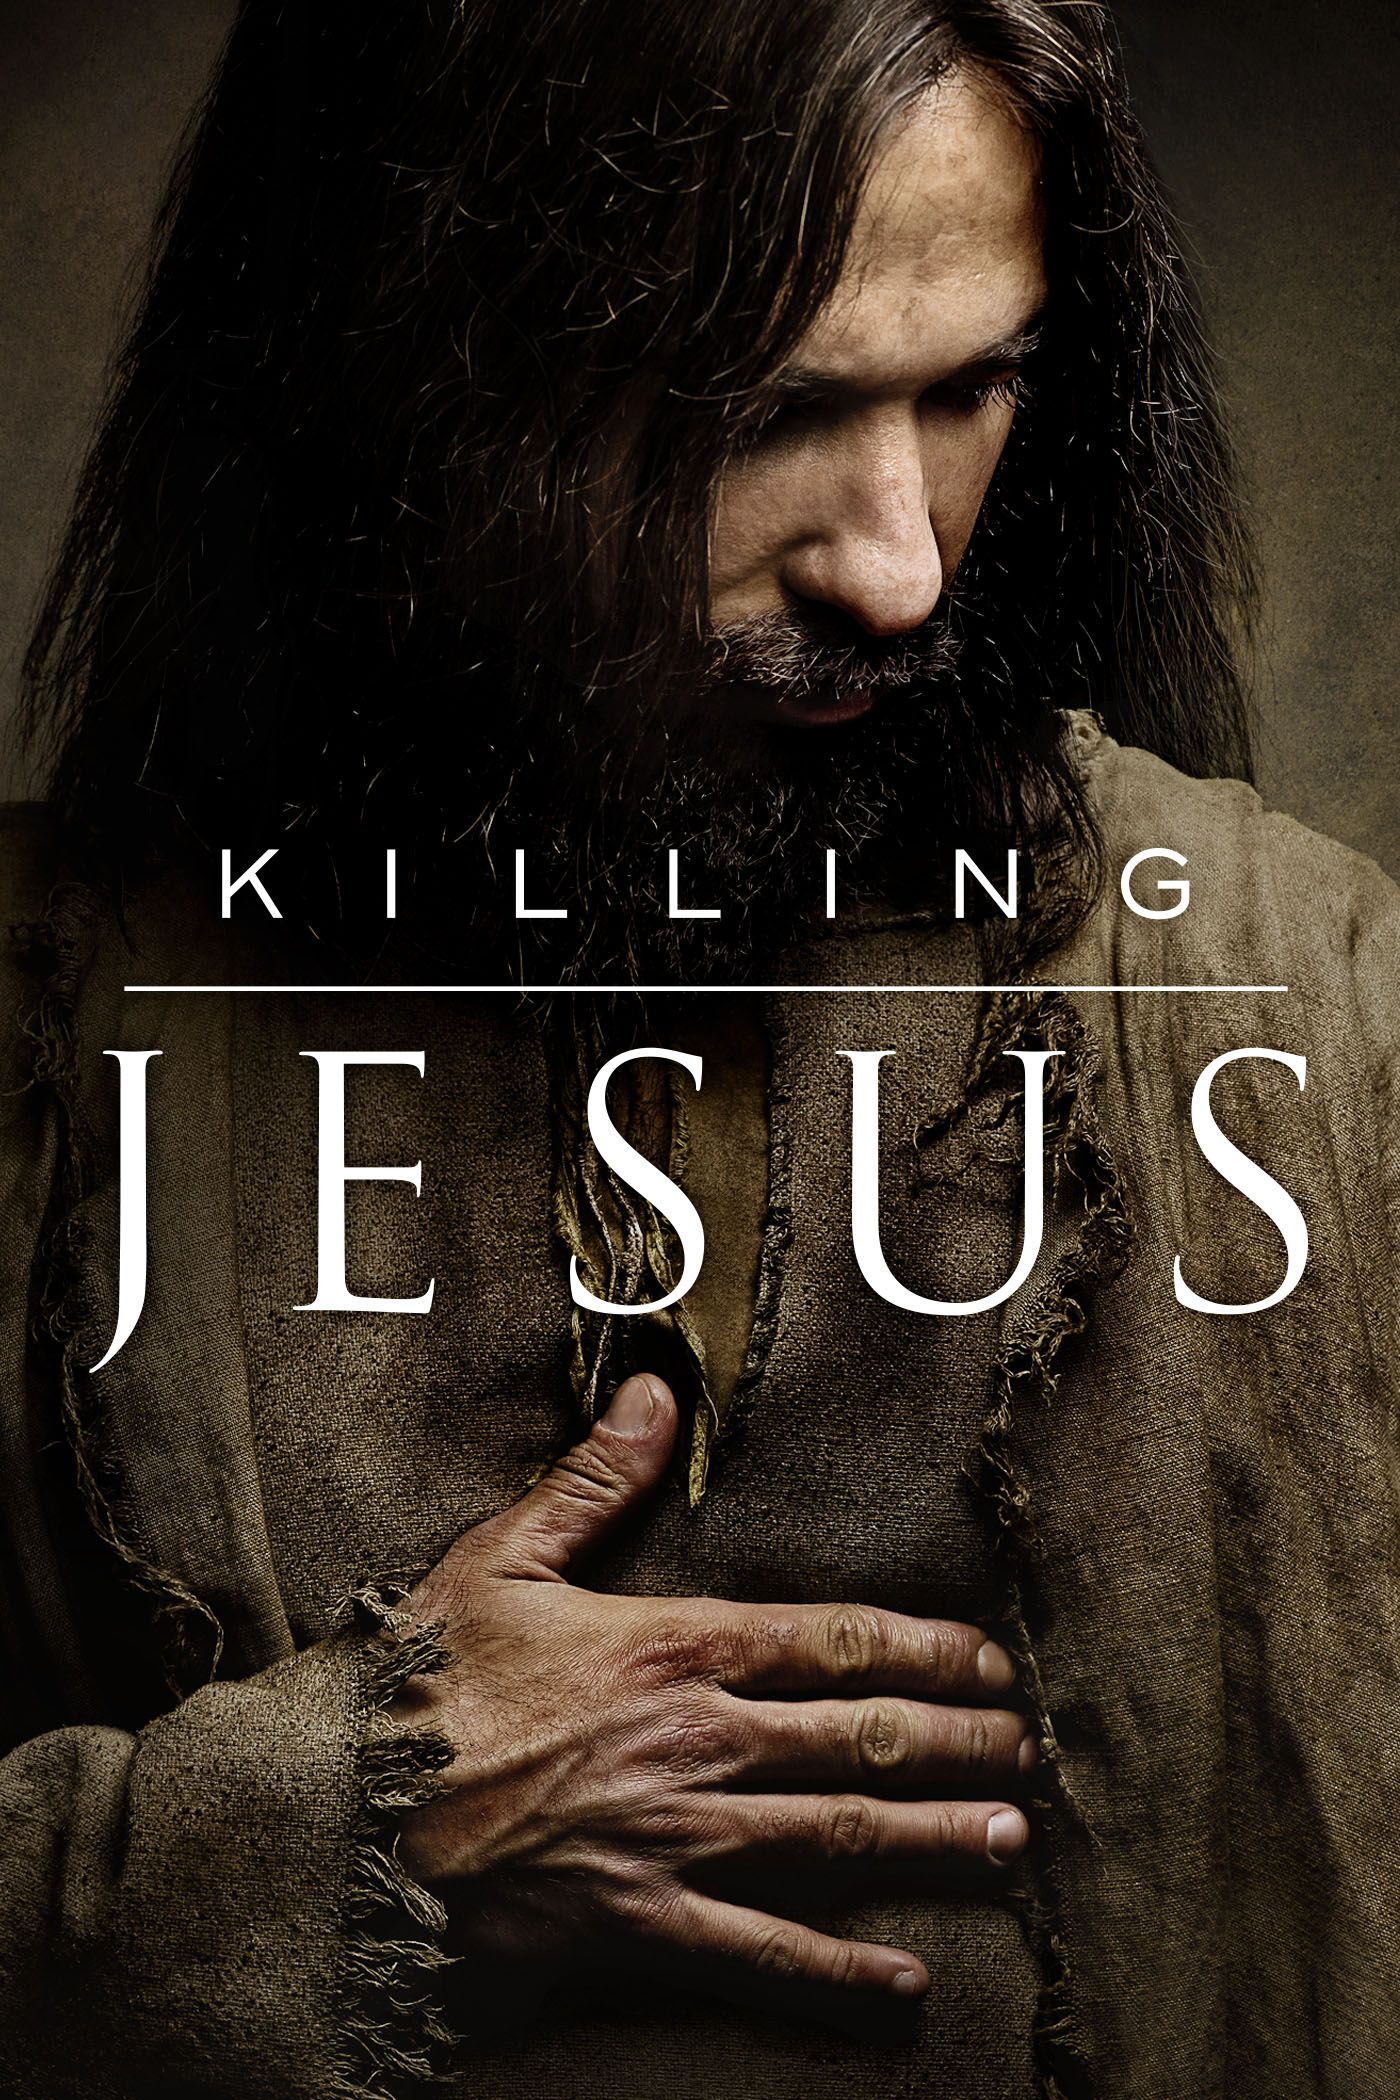 the passion of christ full movie english version